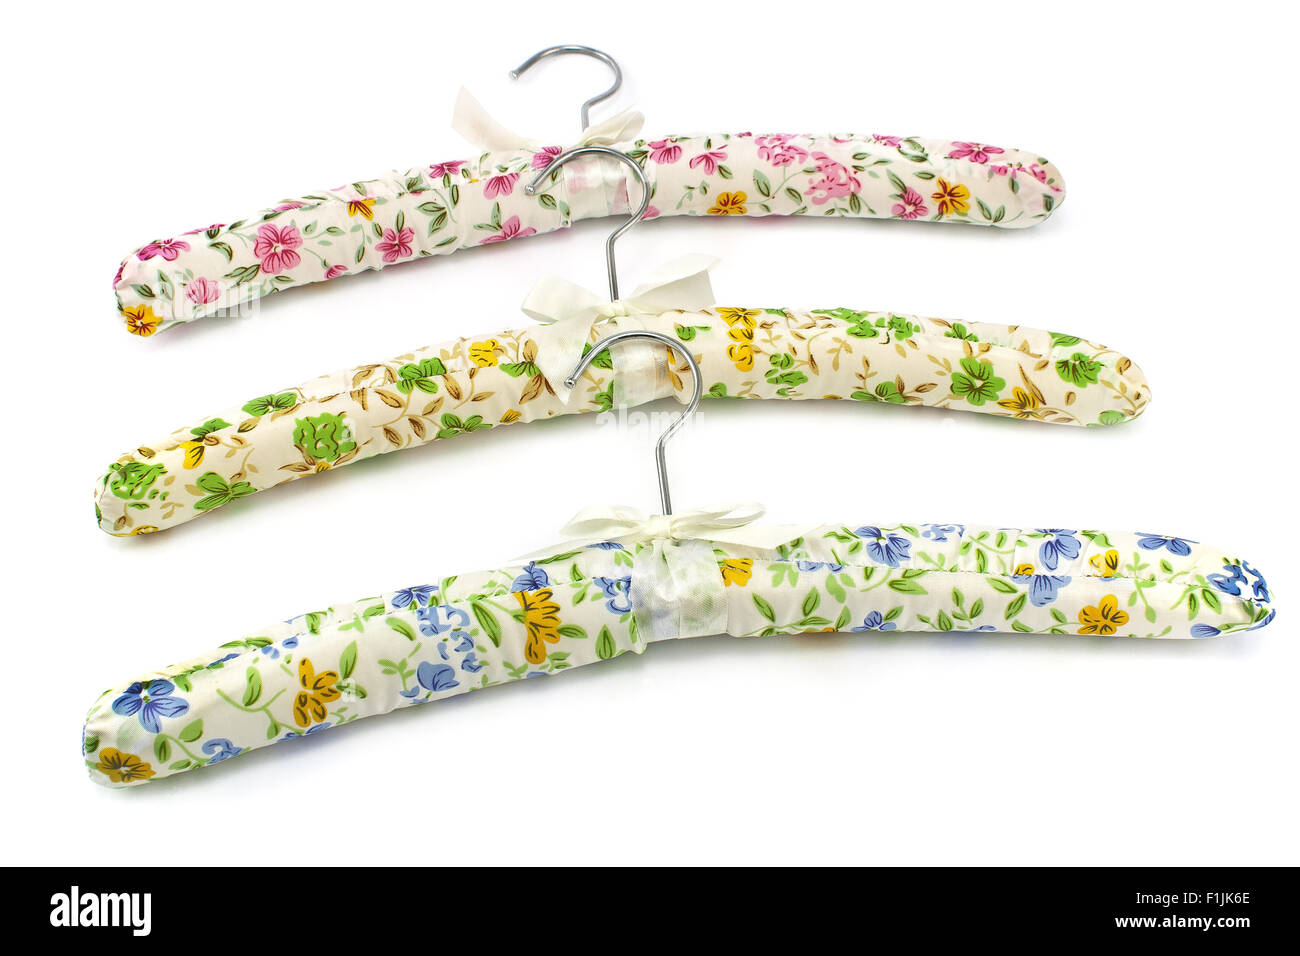 Colorful silk clothes hangers on white Stock Photo